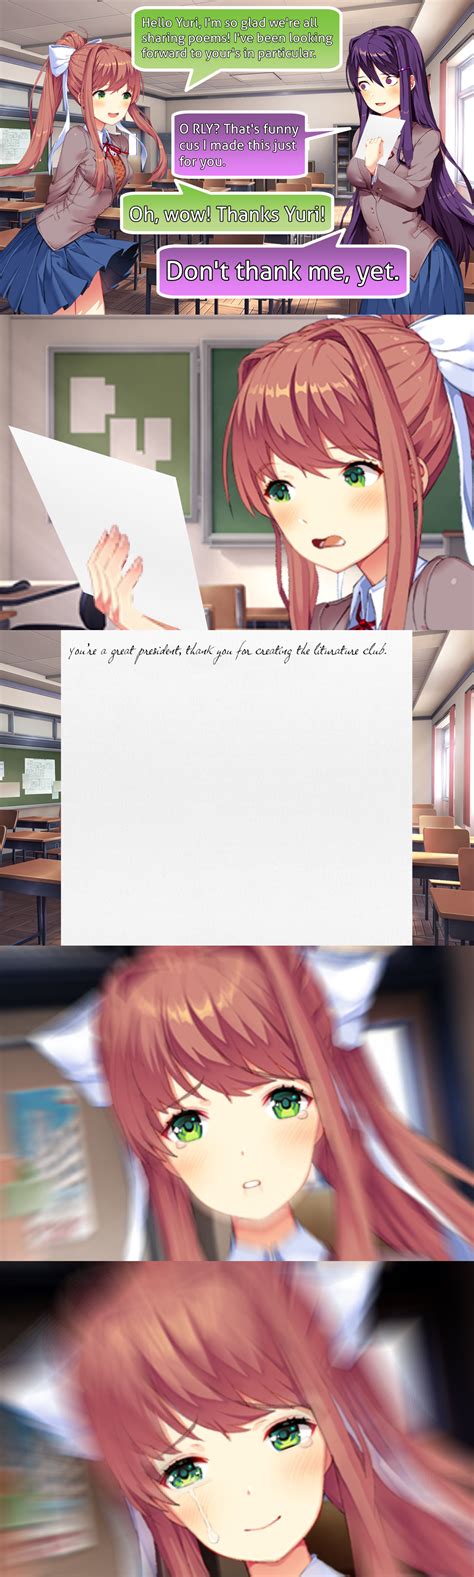 Monika And Yuri Really Exchange Poems Not For The Faint Of Heart V2 R